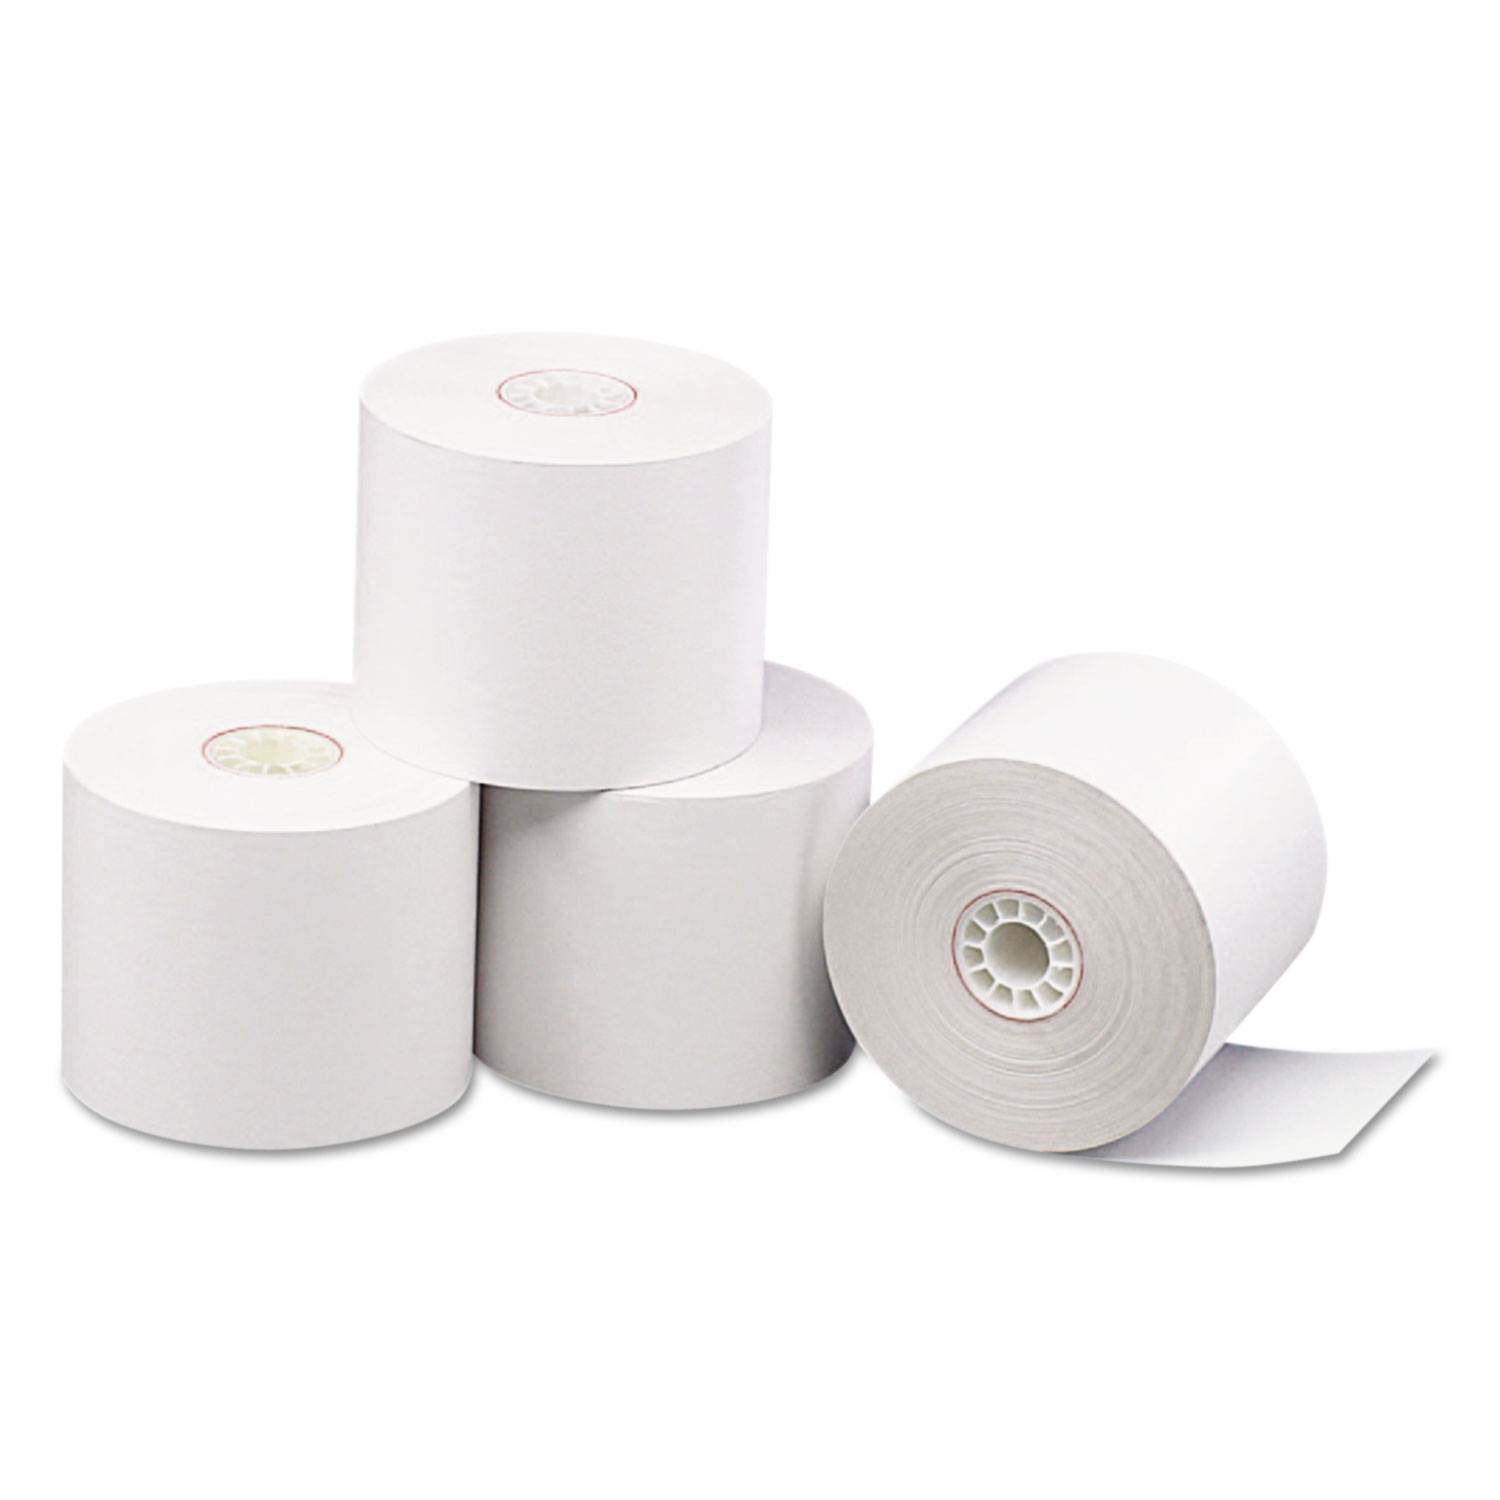  Iconex 05329 Direct Thermal Printing Paper Rolls, 0.45 Core, 2.31 x 209 ft, White, 24/Carton (ICX90781286) 